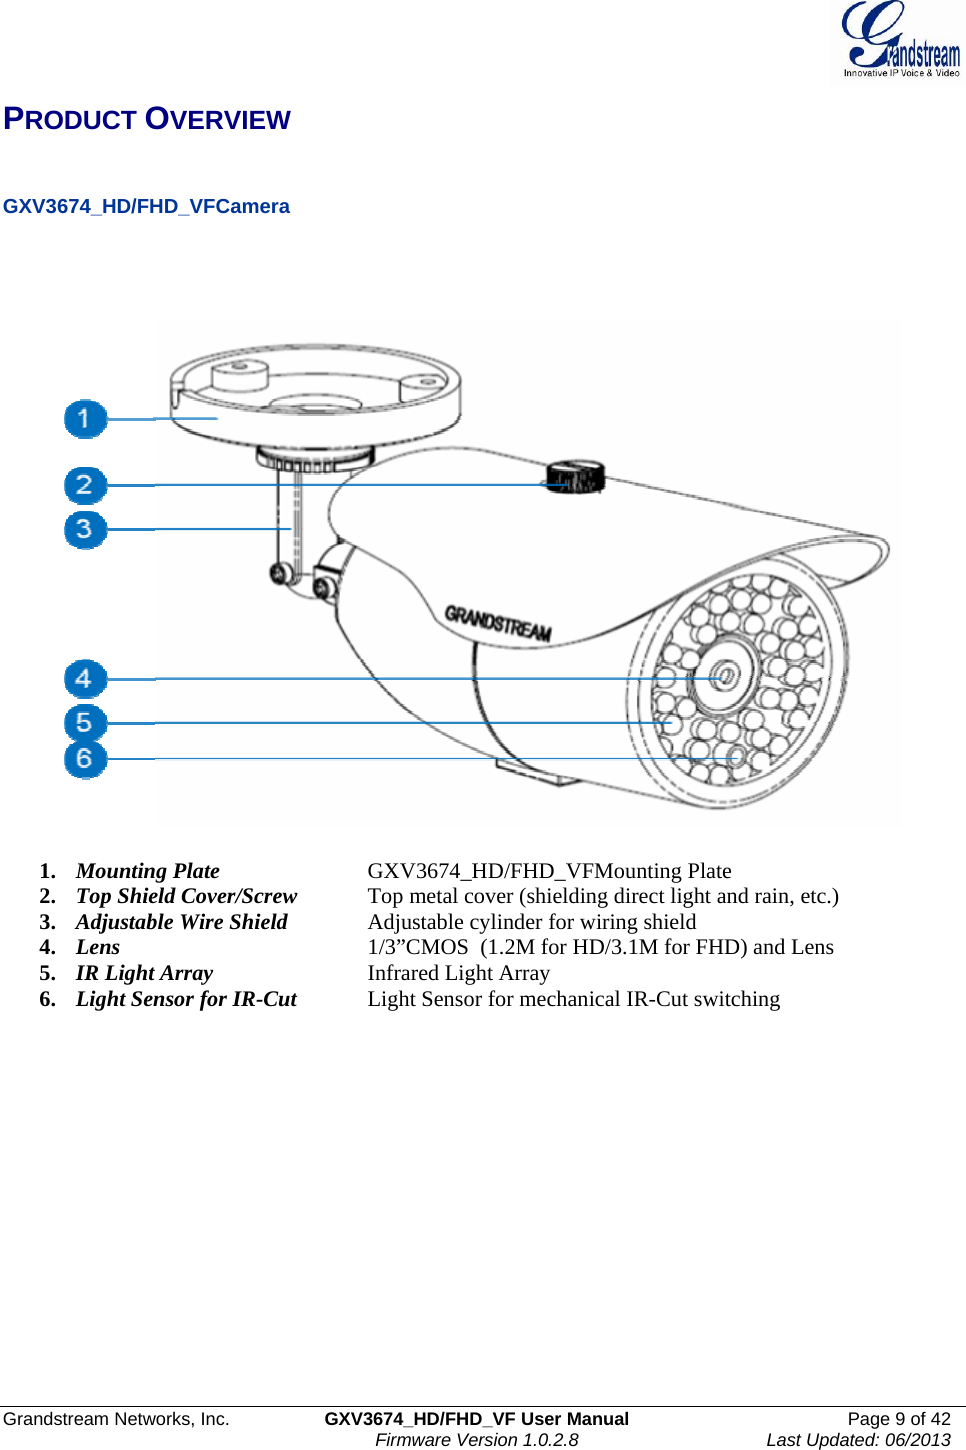  Grandstream Networks, Inc.  GXV3674_HD/FHD_VF User Manual  Page 9 of 42   Firmware Version 1.0.2.8  Last Updated: 06/2013  PRODUCT OVERVIEW   GXV3674_HD/FHD_VFCamera       1. Mounting Plate     GXV3674_HD/FHD_VFMounting  Plate 2. Top Shield Cover/Screw  Top metal cover (shielding direct light and rain, etc.) 3. Adjustable Wire Shield   Adjustable cylinder for wiring shield 4. Lens       1/3”CMOS  (1.2M for HD/3.1M for FHD) and Lens 5. IR Light Array     Infrared Light Array 6. Light Sensor for IR-Cut  Light Sensor for mechanical IR-Cut switching  